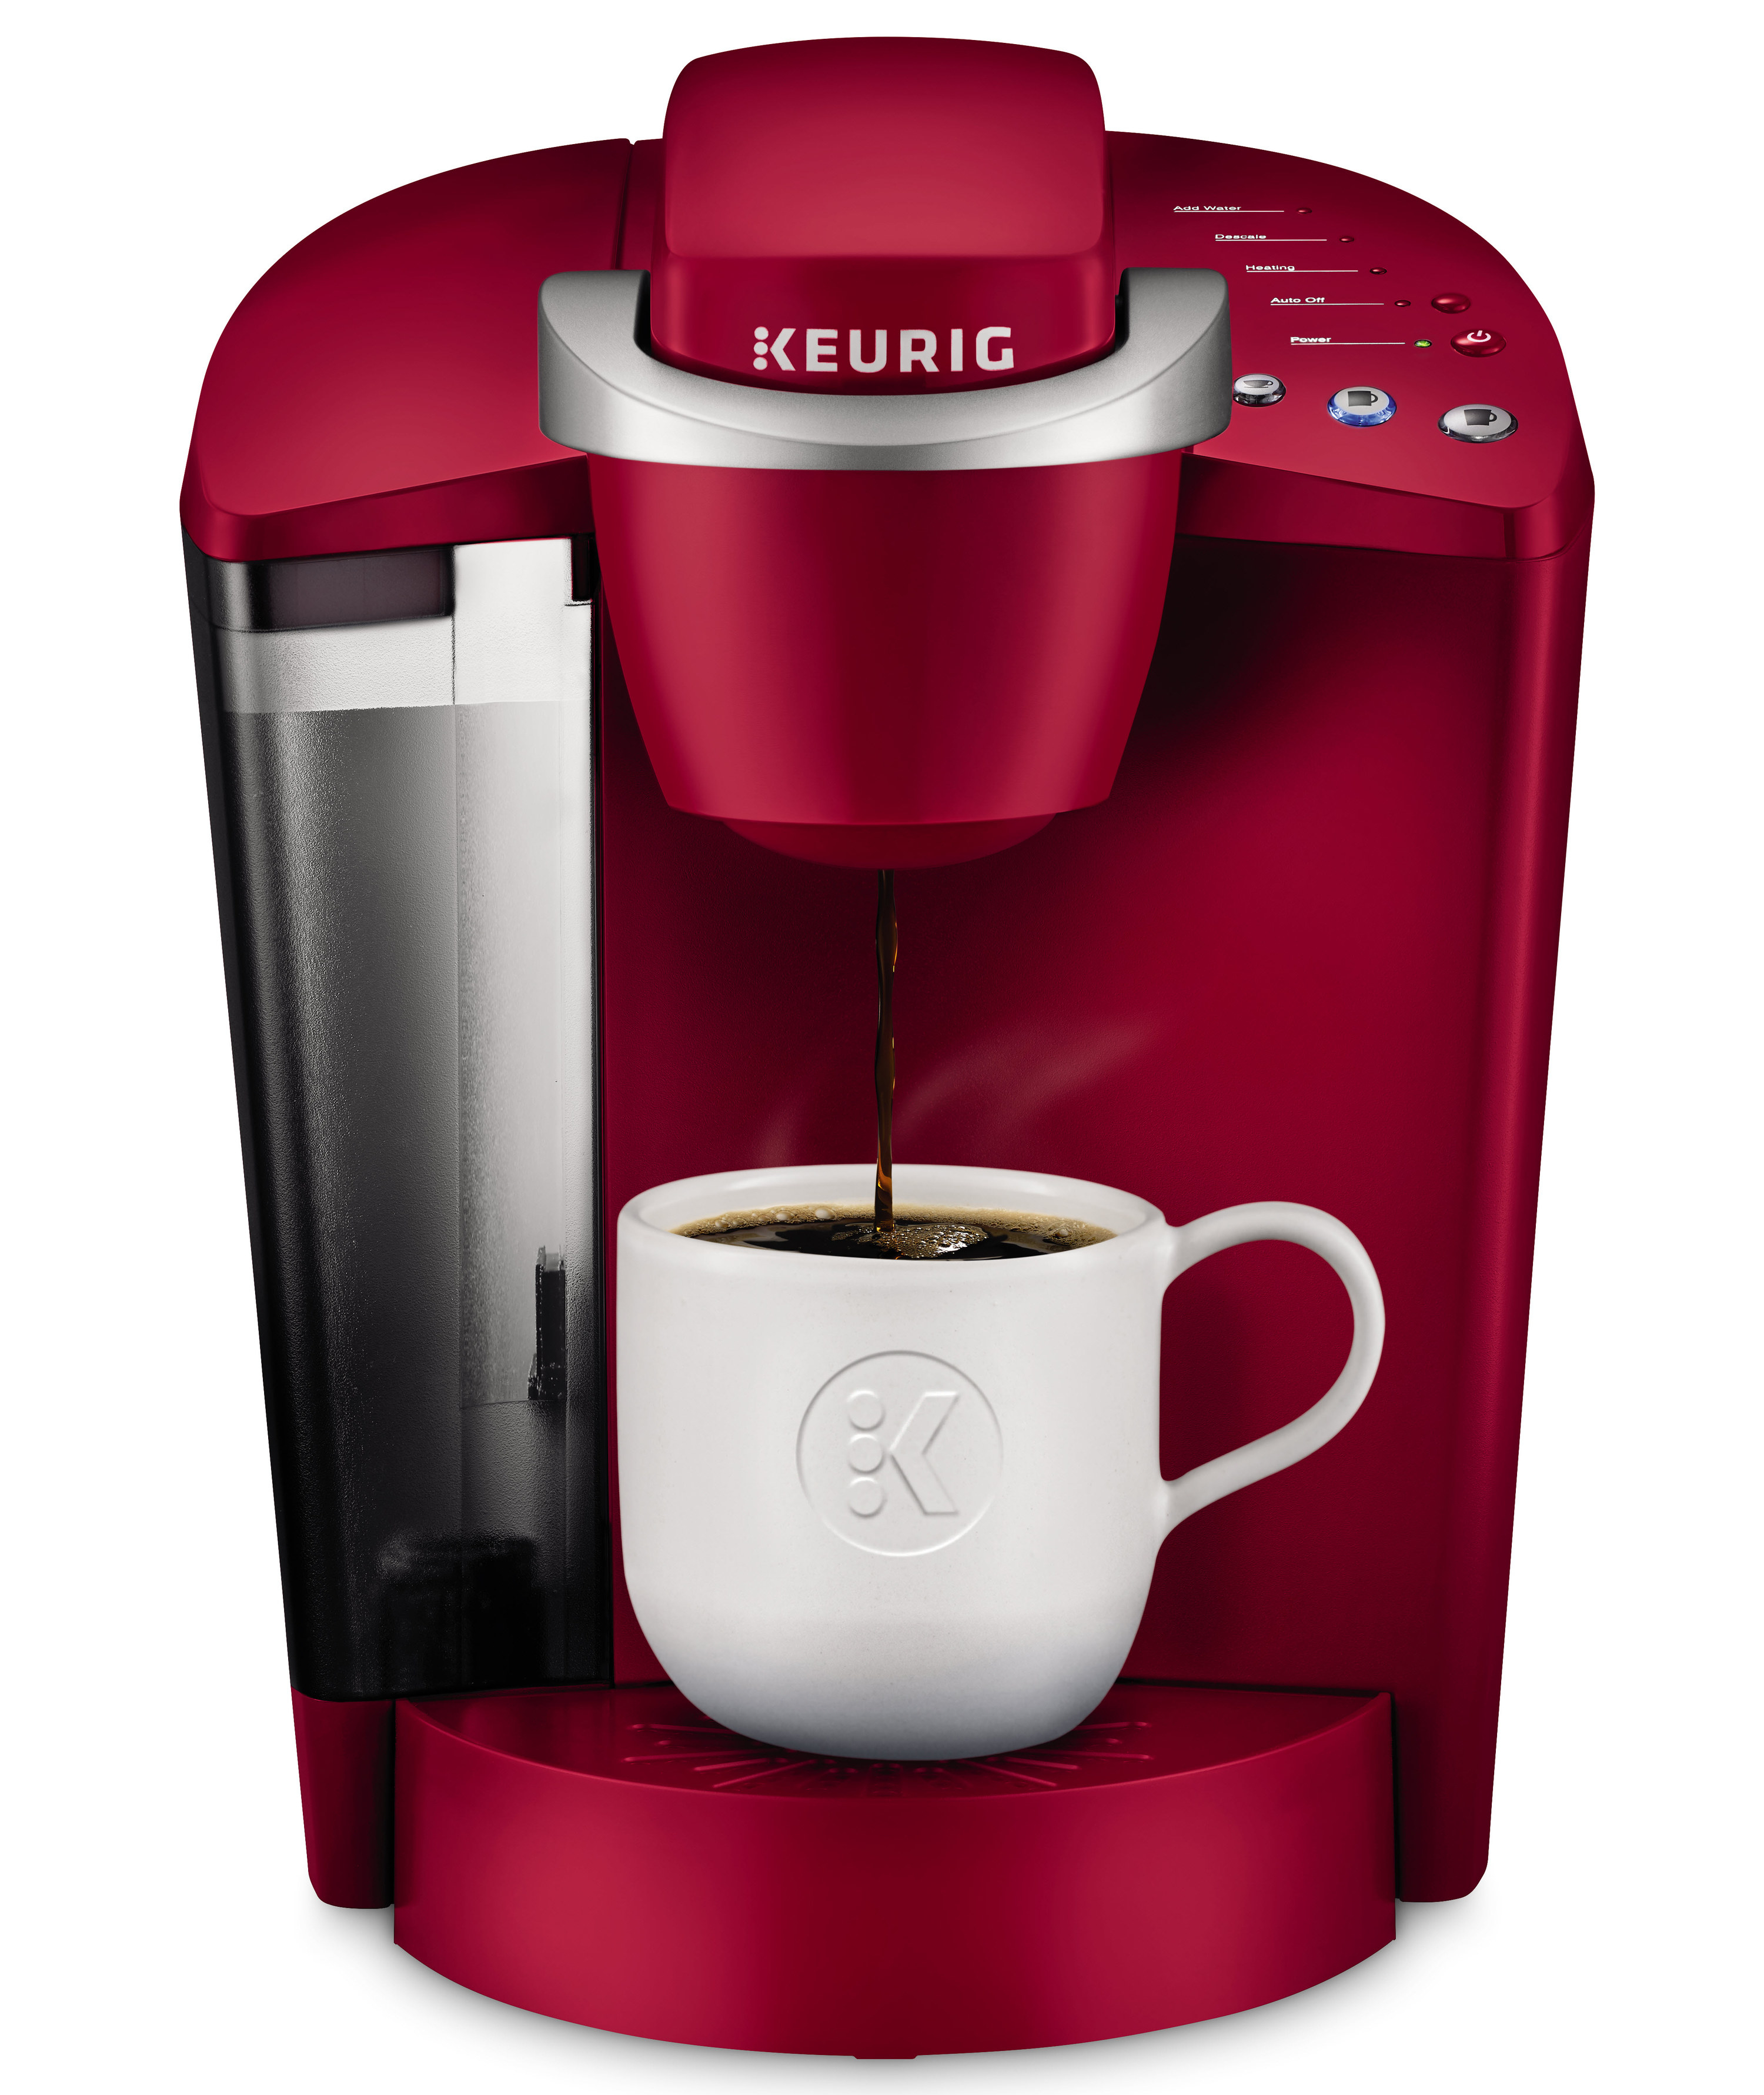 The red Keurig pouring coffee